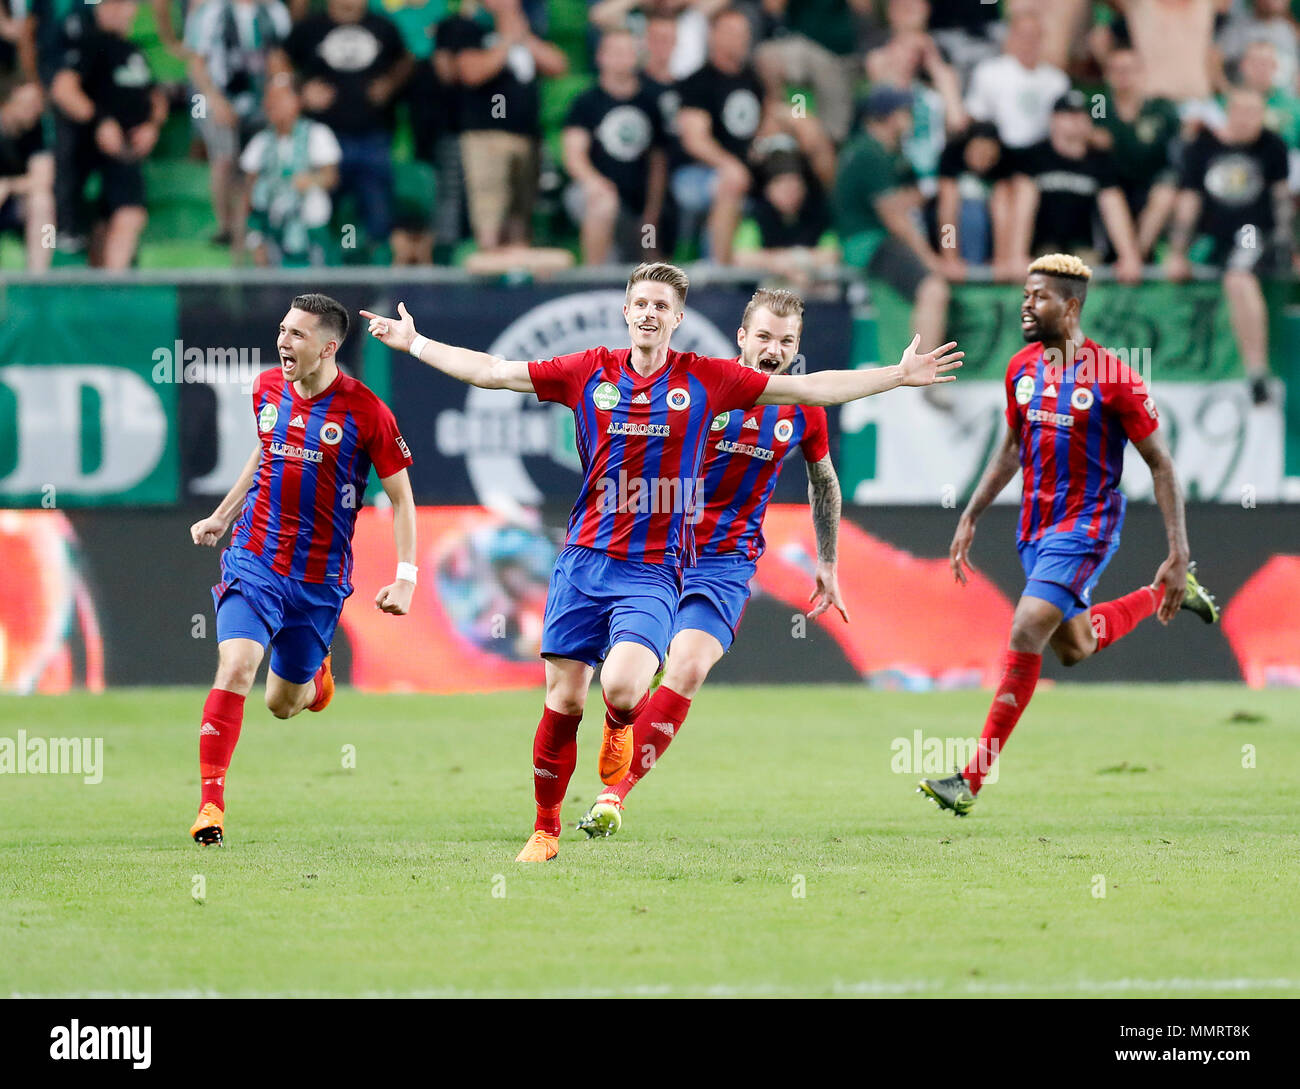 BUDAPEST, HUNGARY - MAY 12: Tamas Egerszegi of Vasas FC (l2) celebrates his  equaliser in the last minute of the game with Mate Vida of Vasas FC (l),  Vit Benes of Vasas